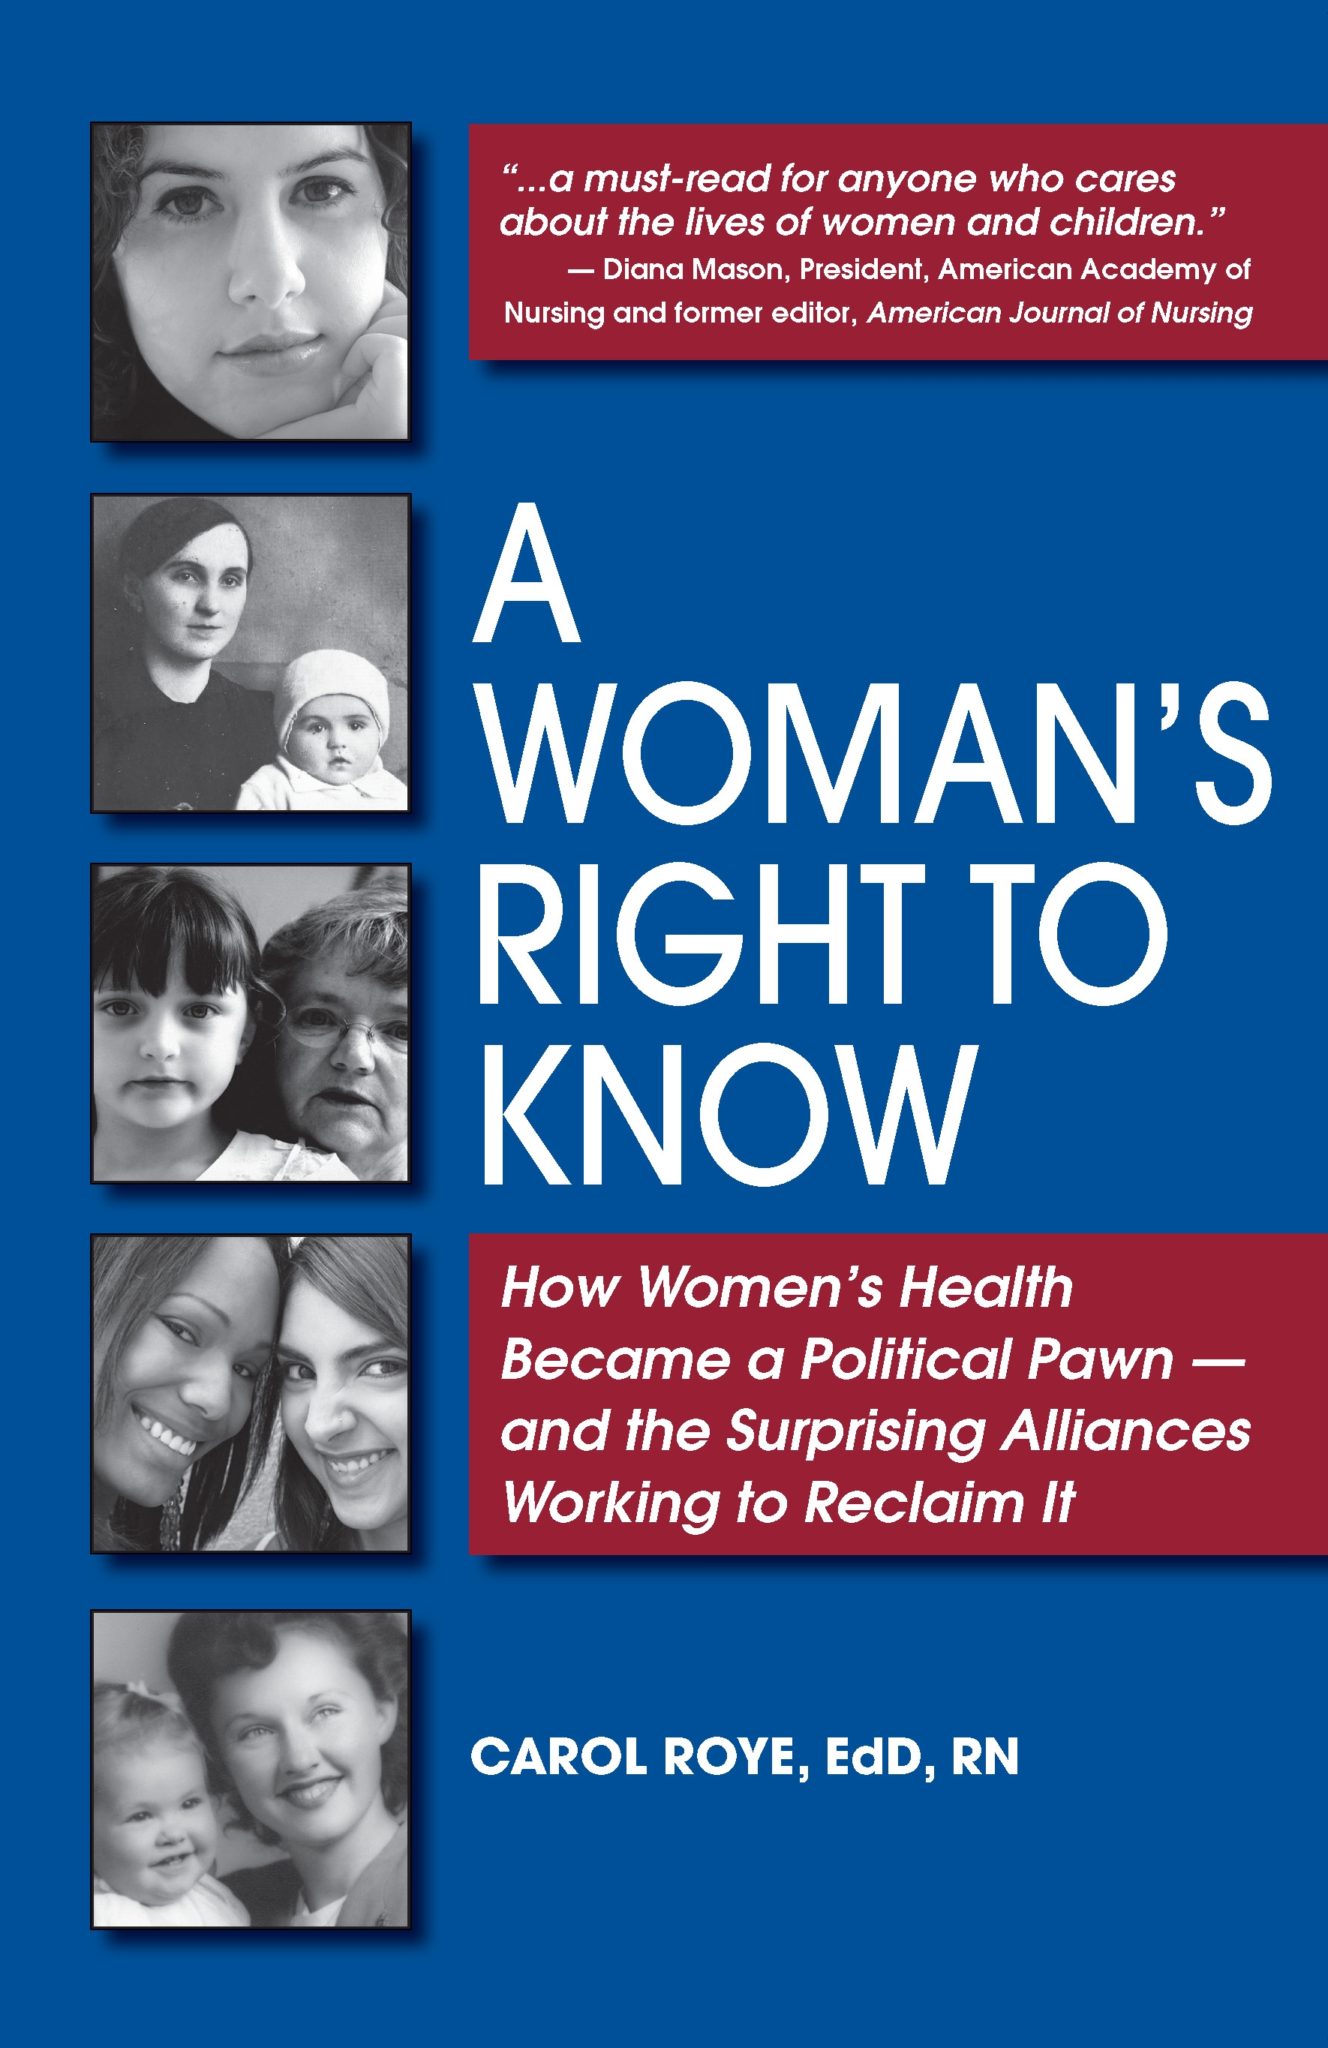 A Woman’s Right to Know by Carol Roye